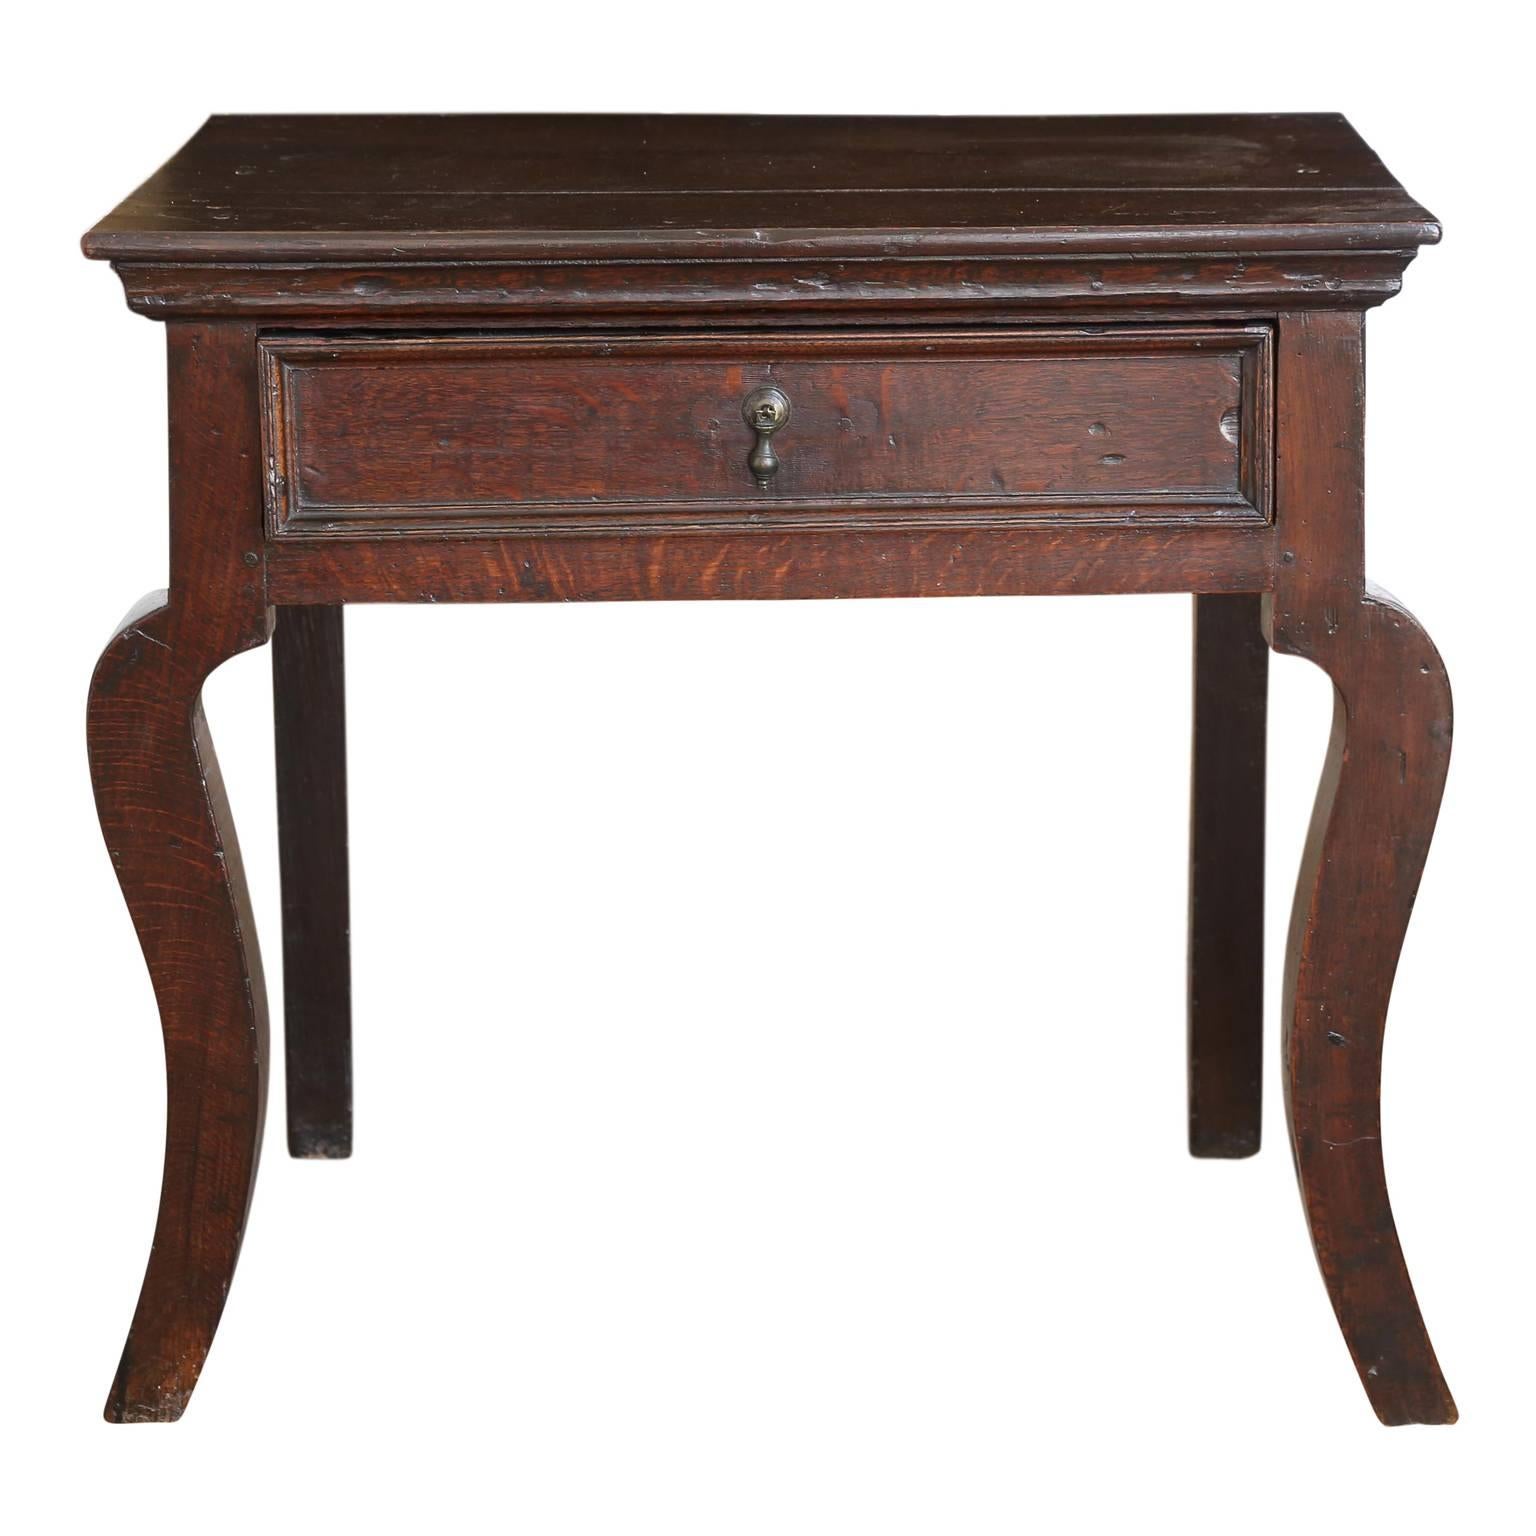 Brown English oak side table with single (trap-door bottom) drawer and front legs which are cabriole-shape silhouettes. Constructed in a vernacular manner, circa 1860-1870 using 18th century elements (probably to sell to a 19th century antique